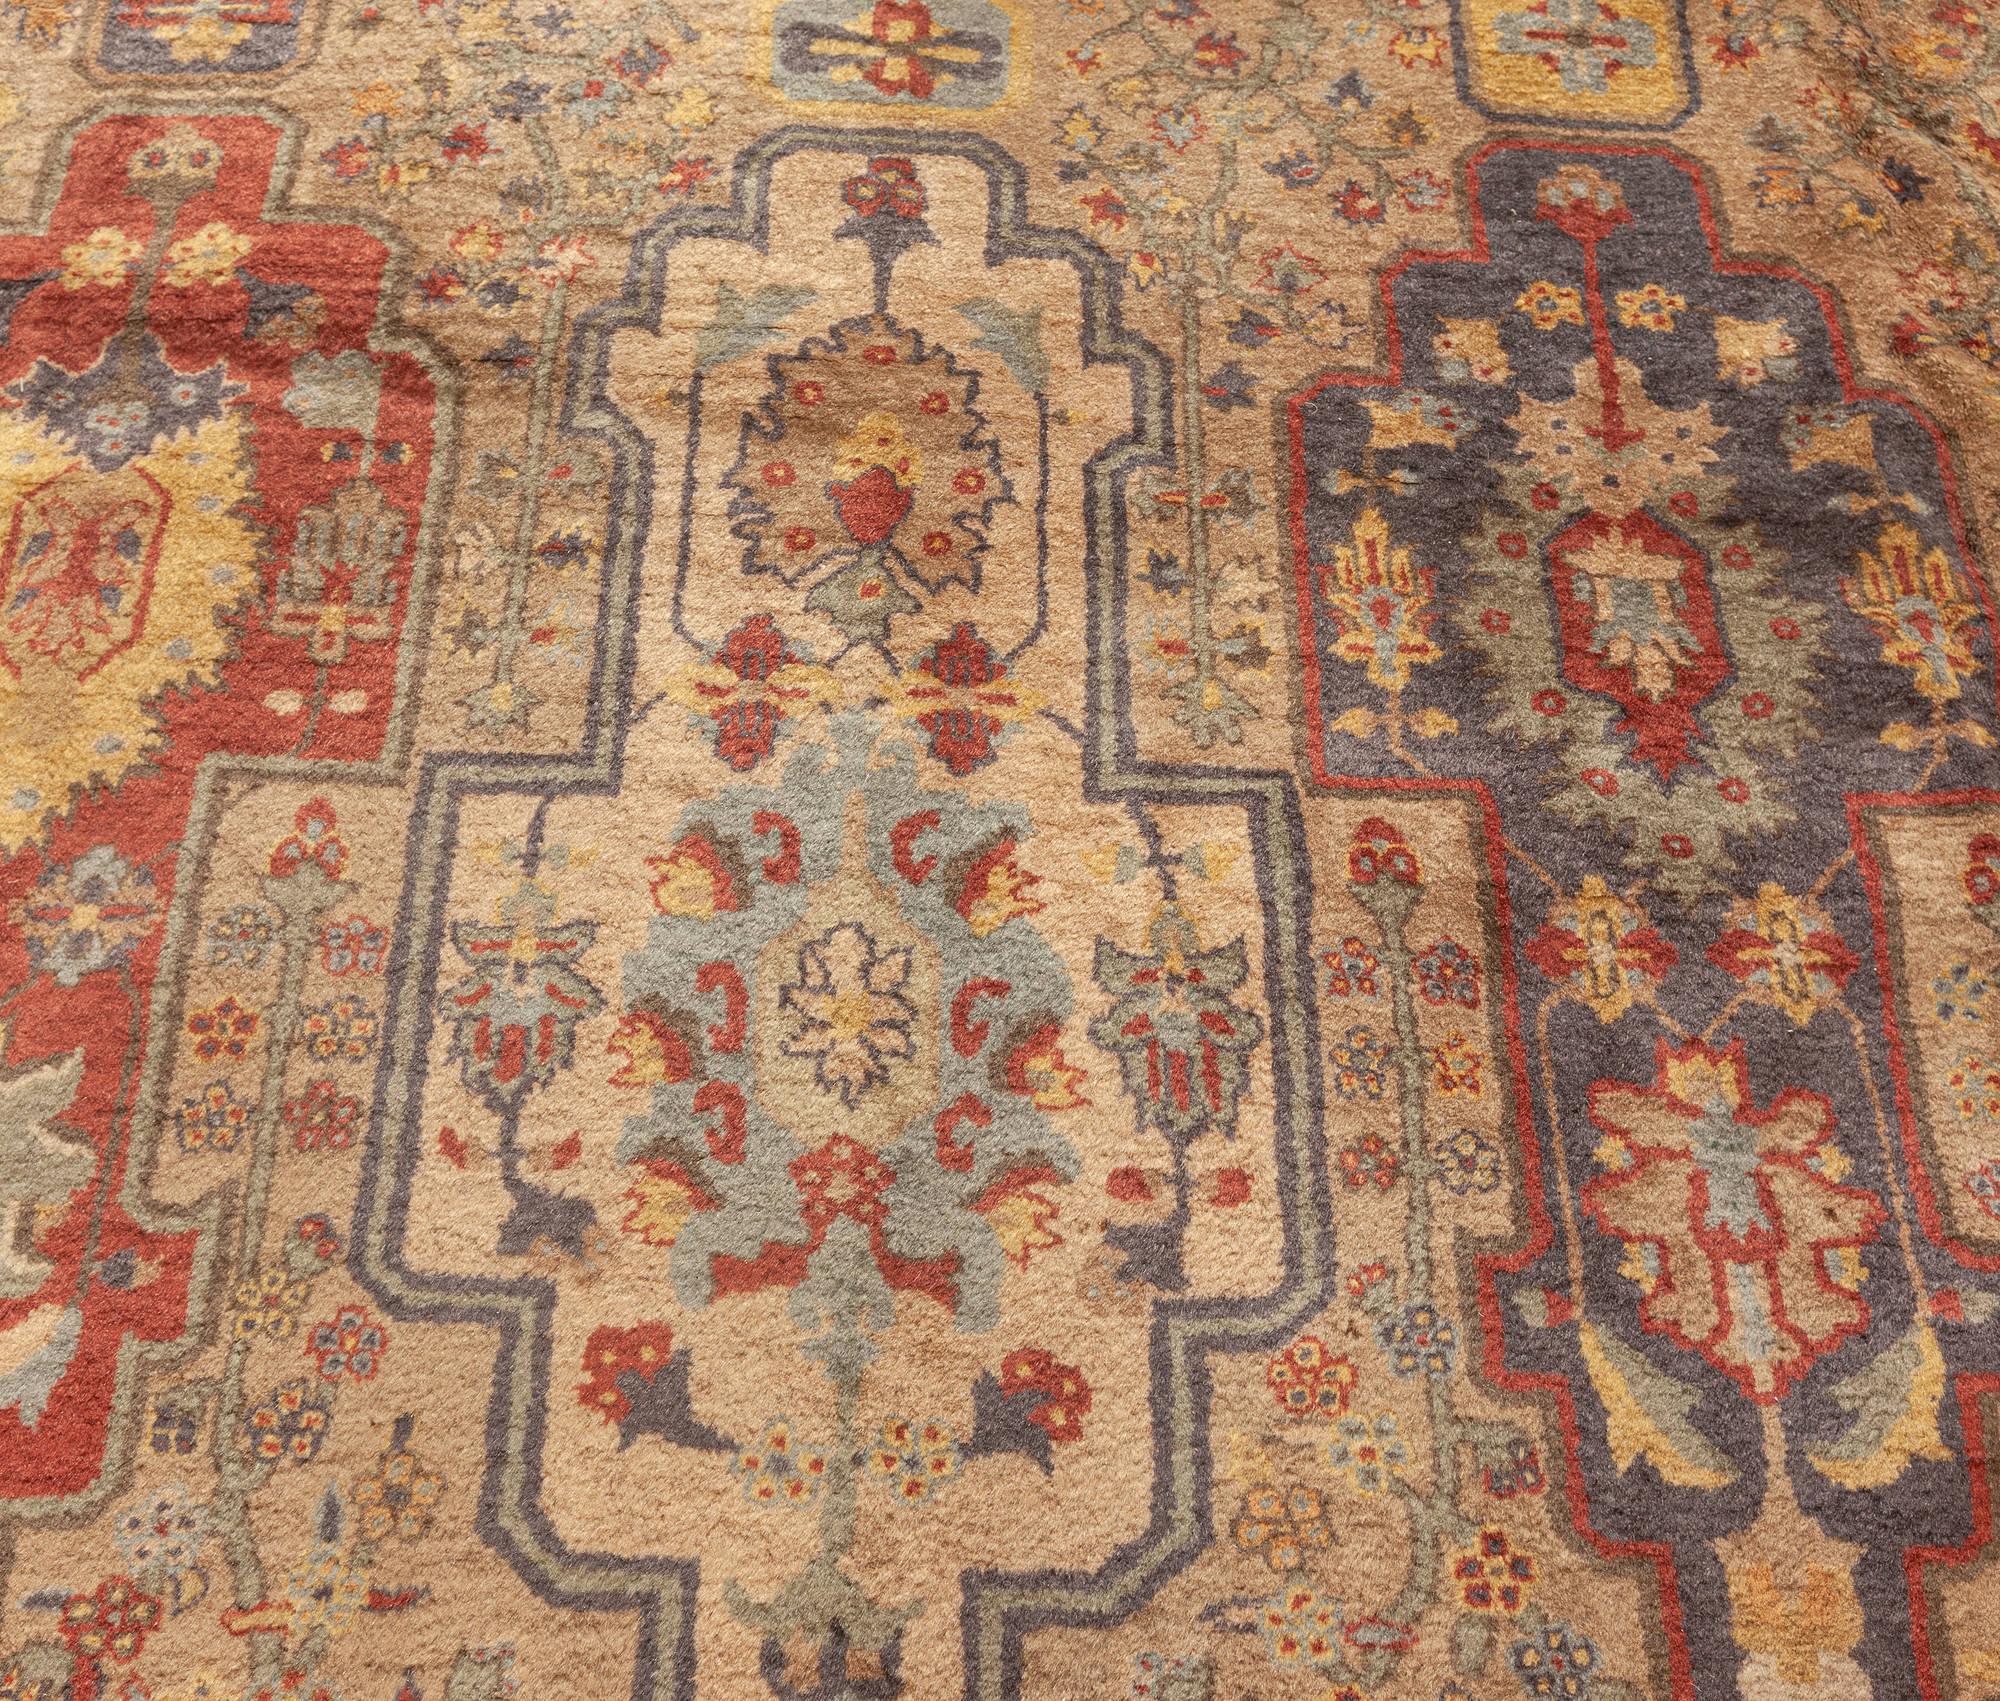 Early 20th century colorful Indian handmade wool carpet (size adjusted)
Size: 11'9